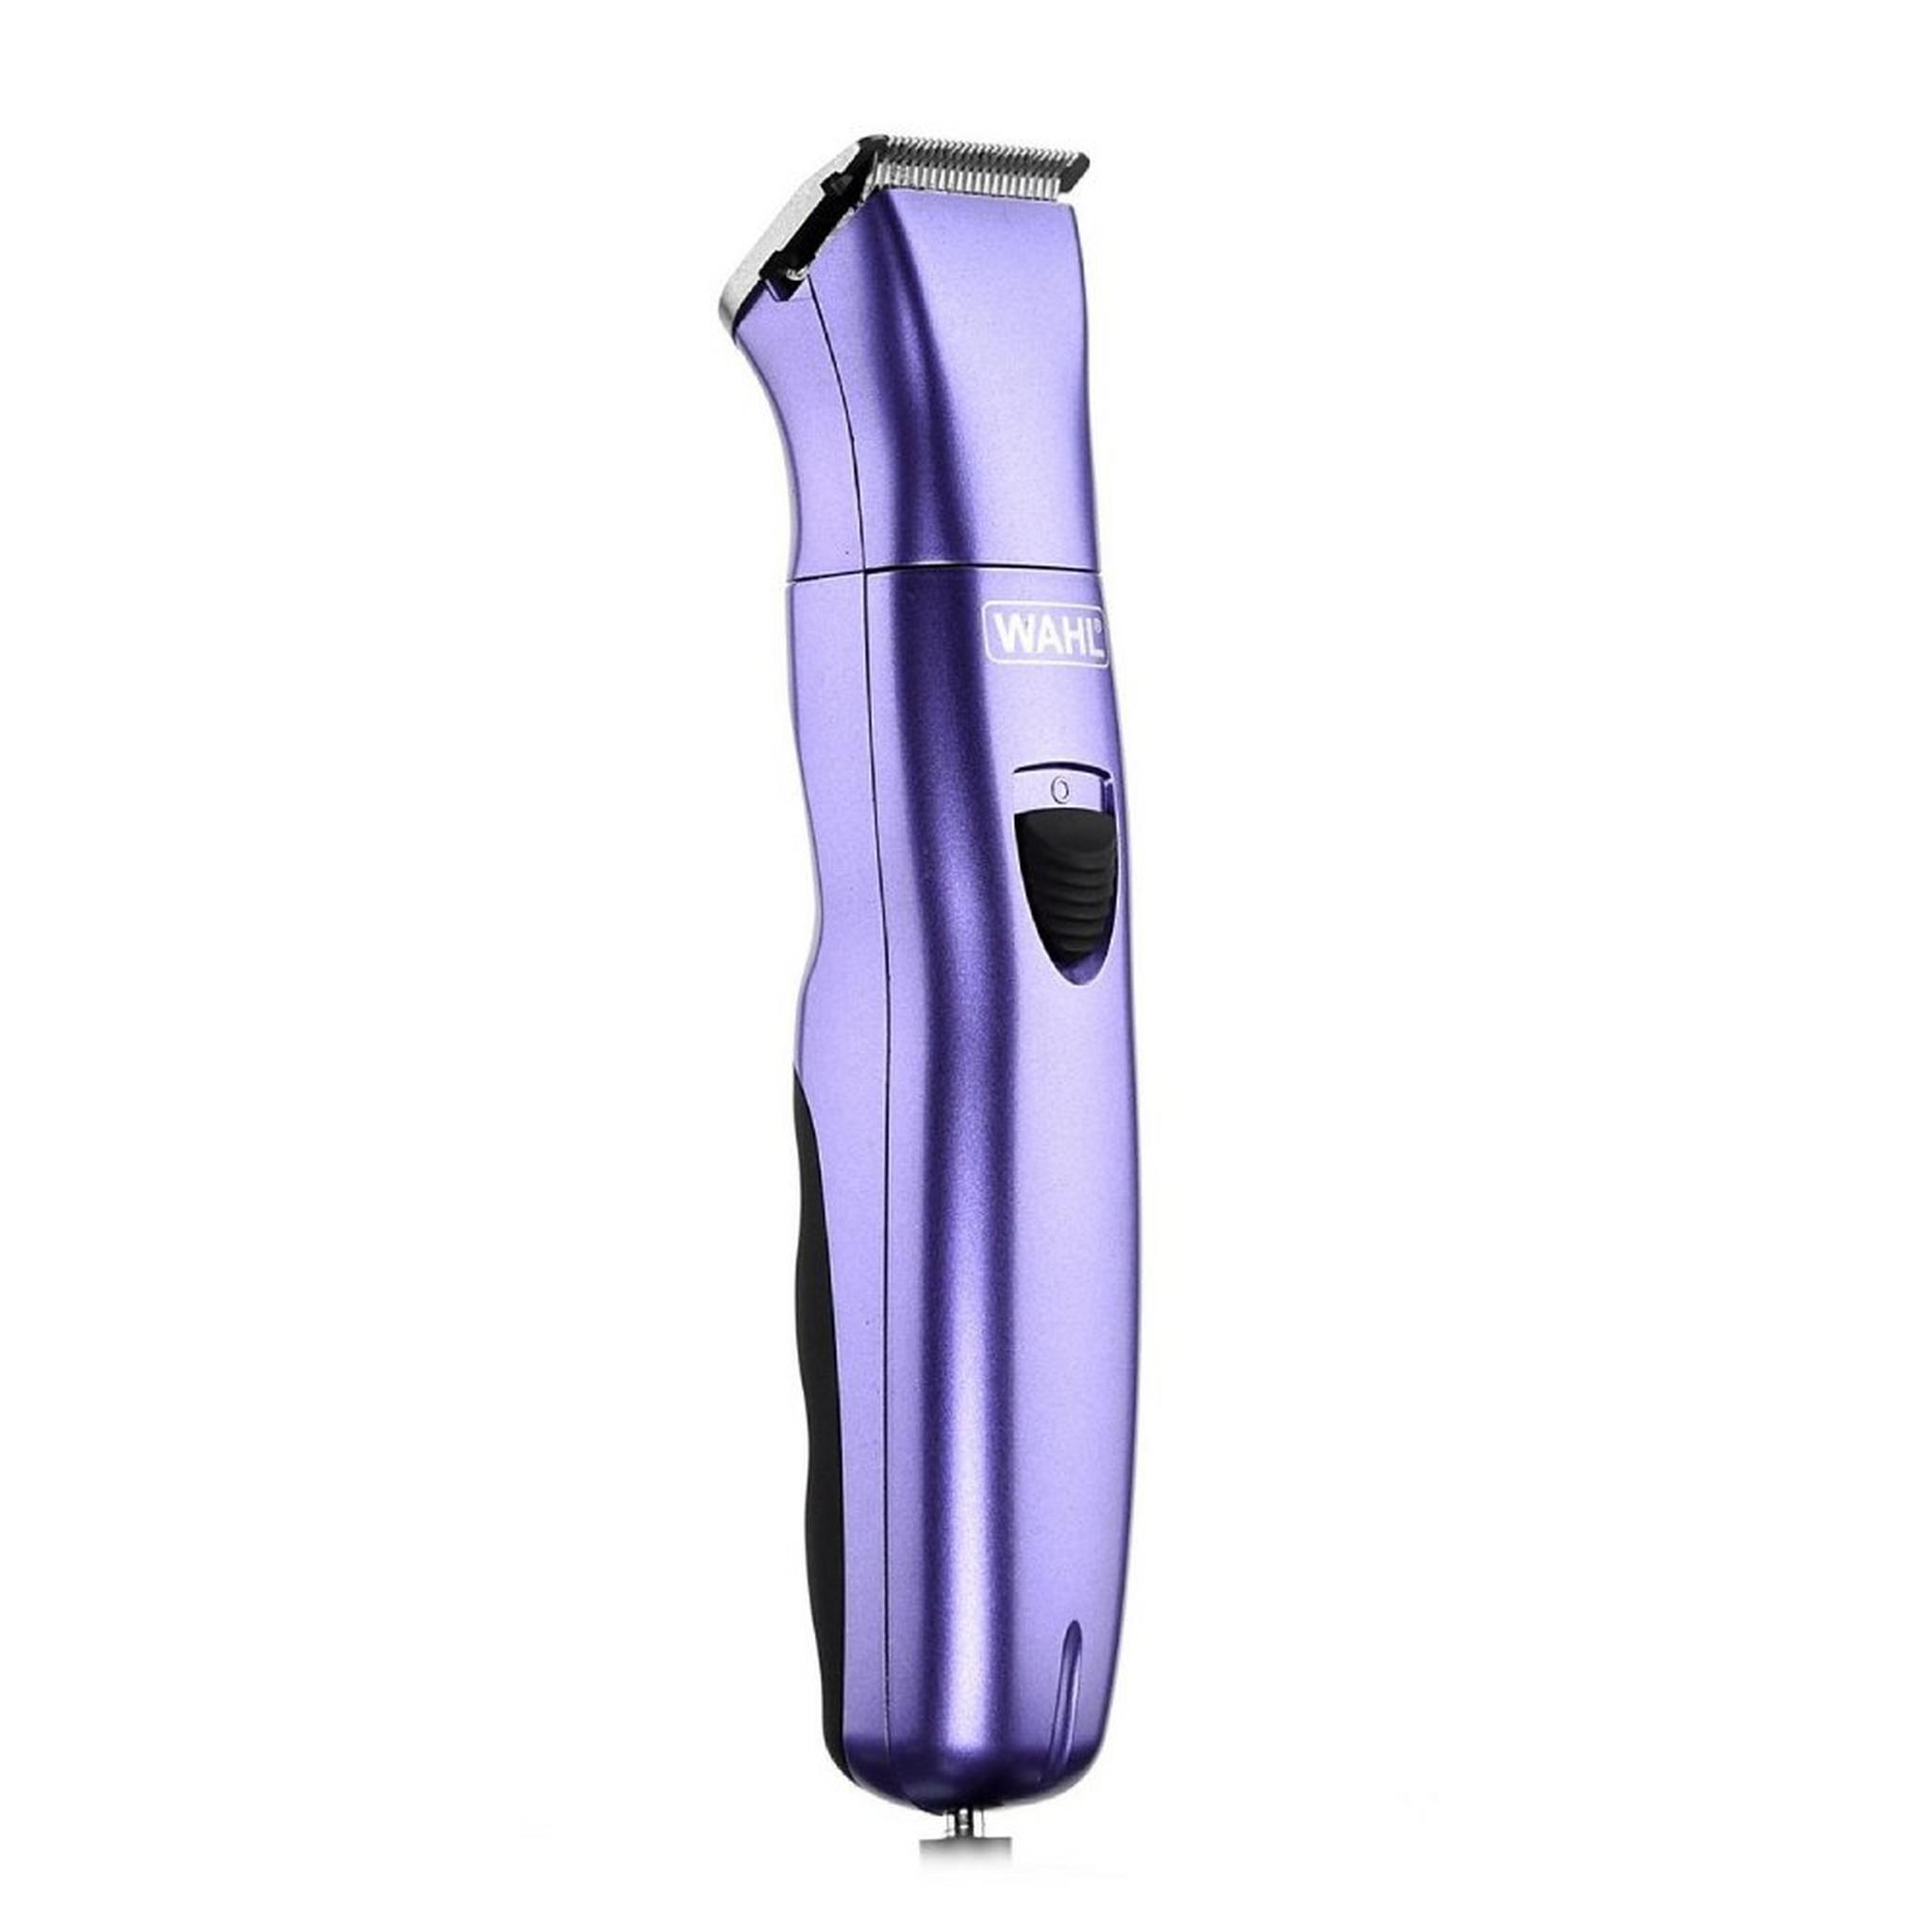 Wahl Lady Trimmer (9865-127)